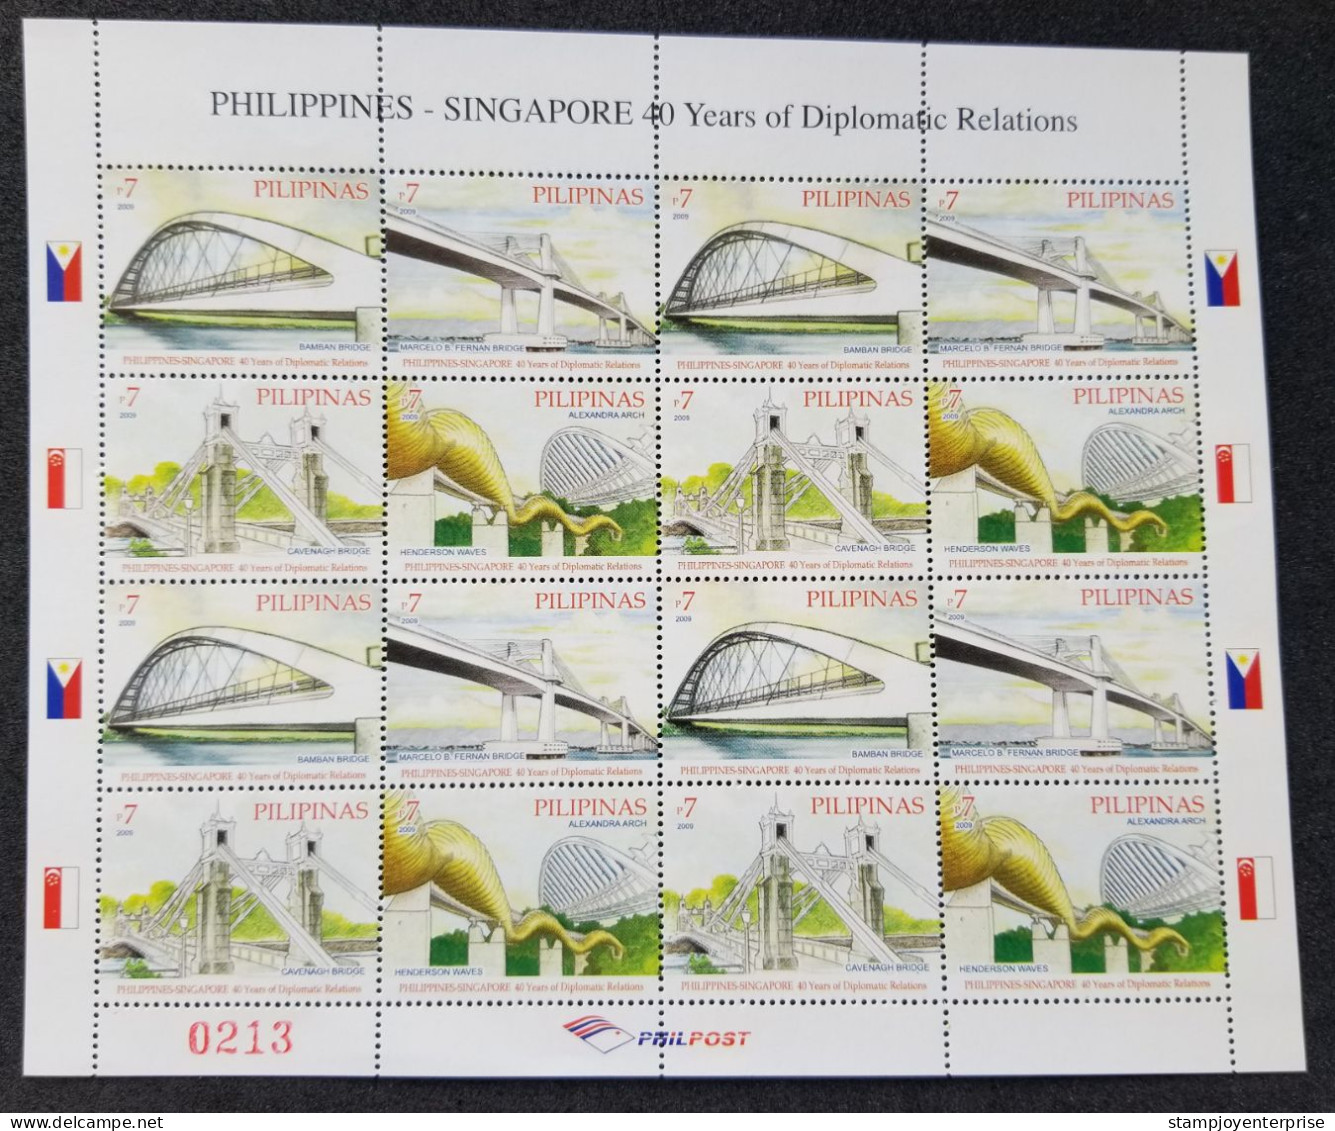 Philippines Singapore Joint Issue 40 Years Diplomatic Relations Bridges 2009 (sheetlet) MNH - Philippines